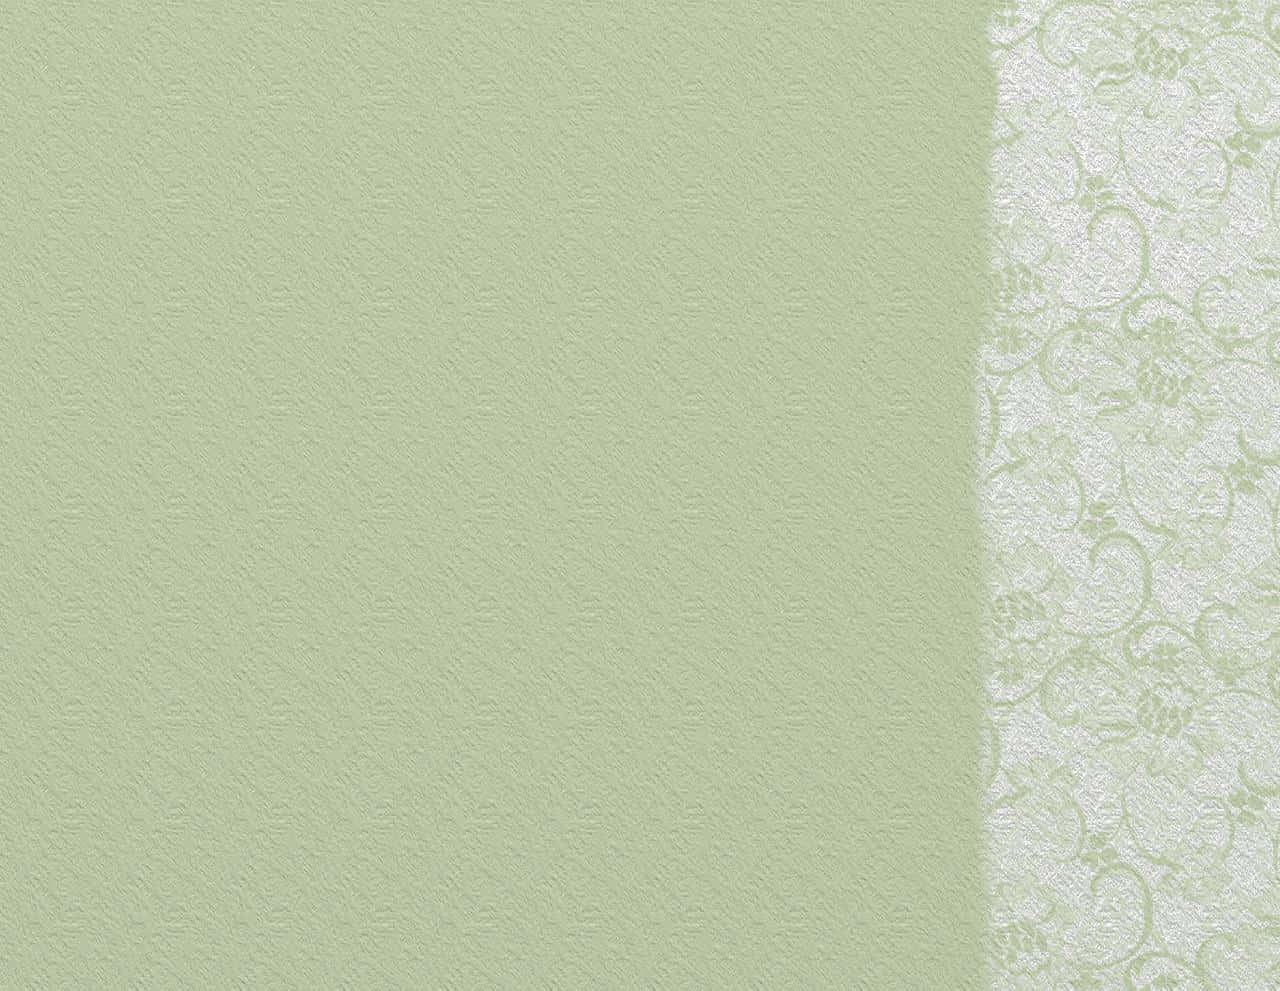 Enjoy a tranquil backdrop of Sage Green